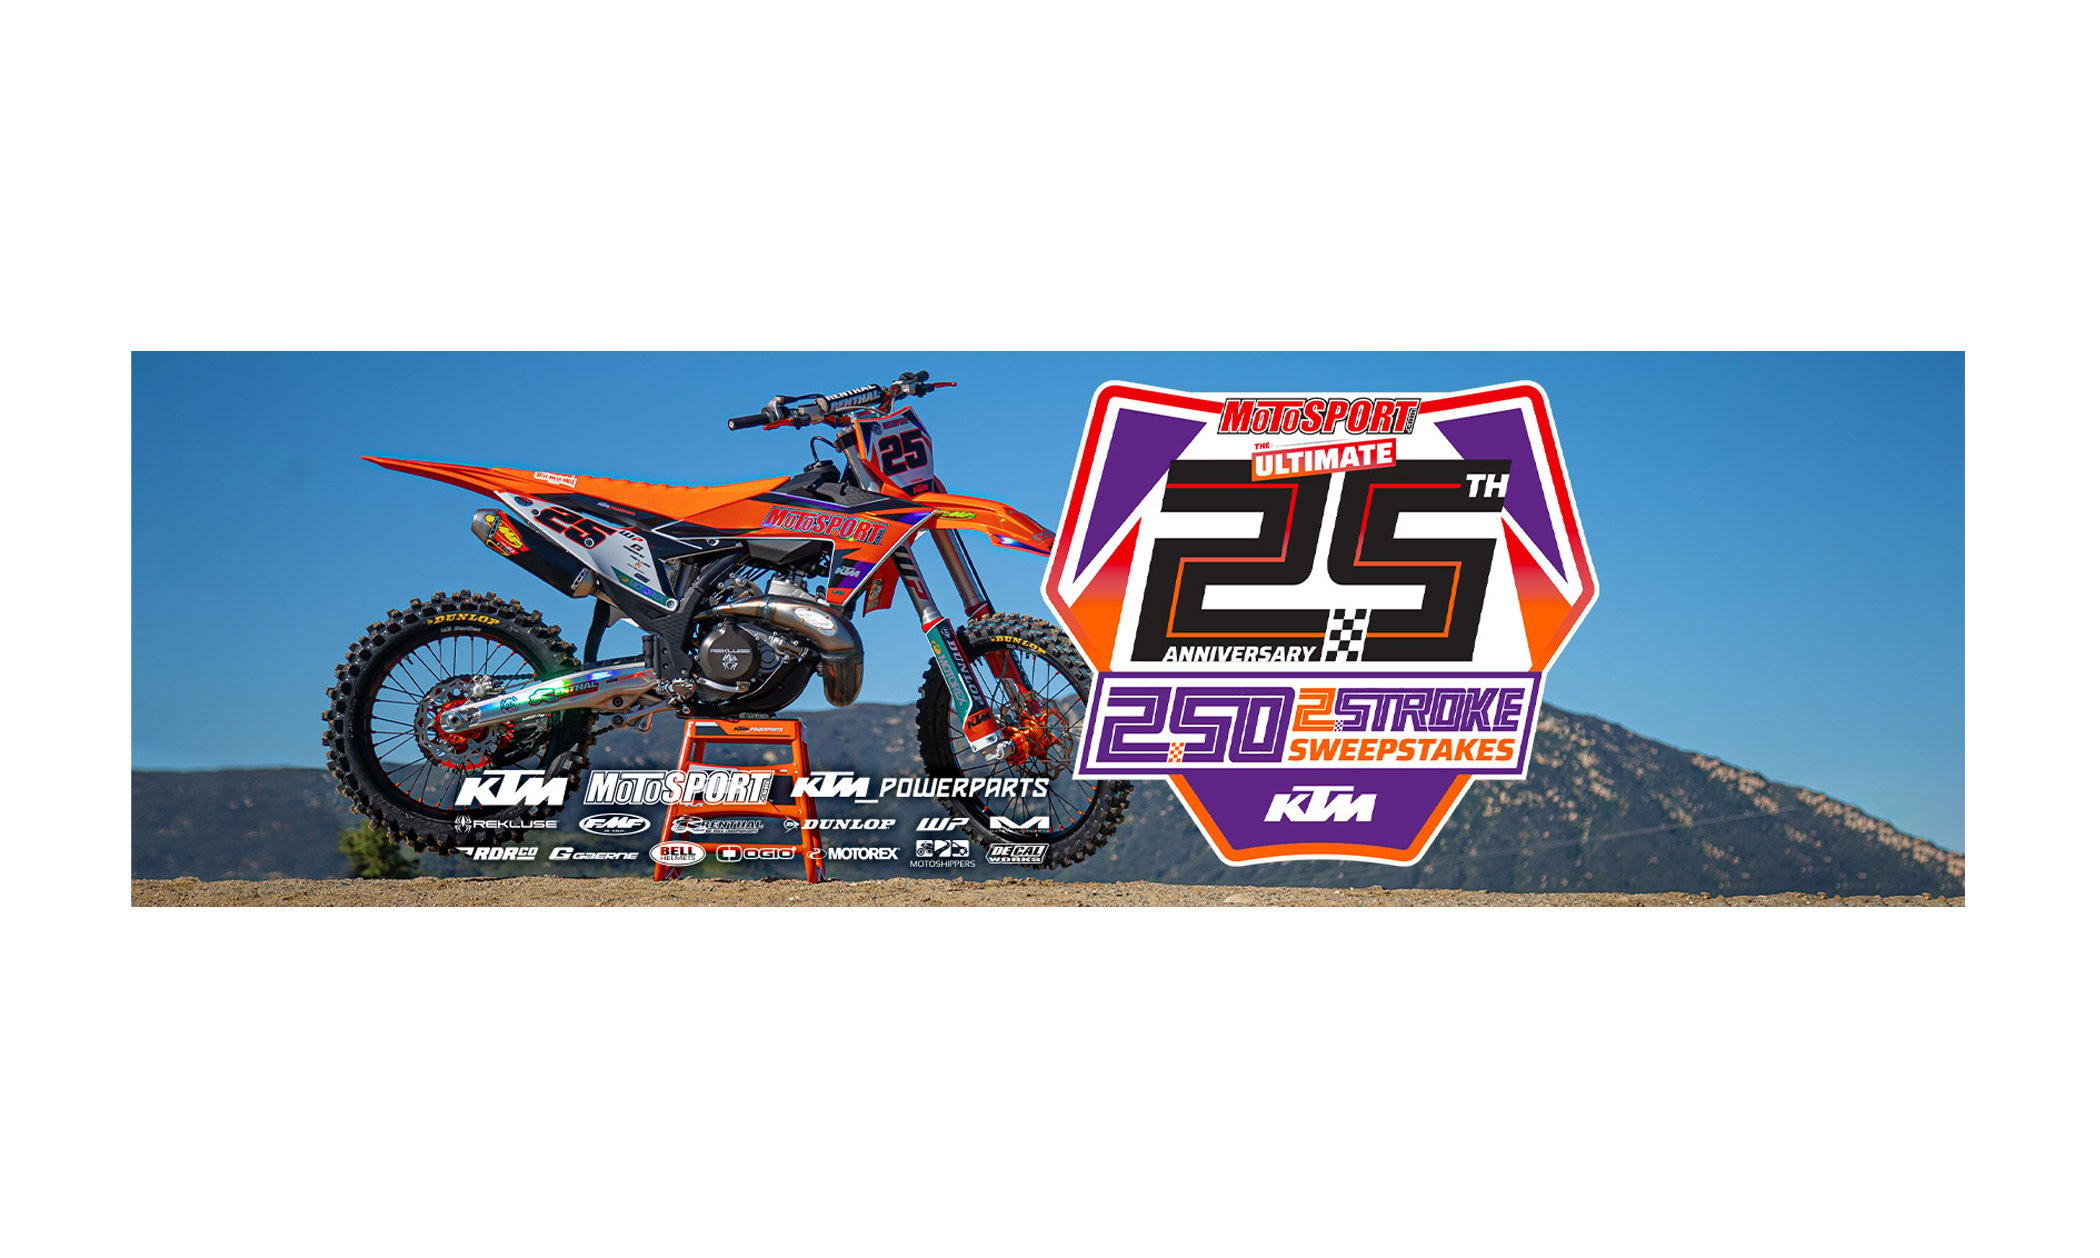 Enter for a Chance to Win a Motocross Bike and Accessories!